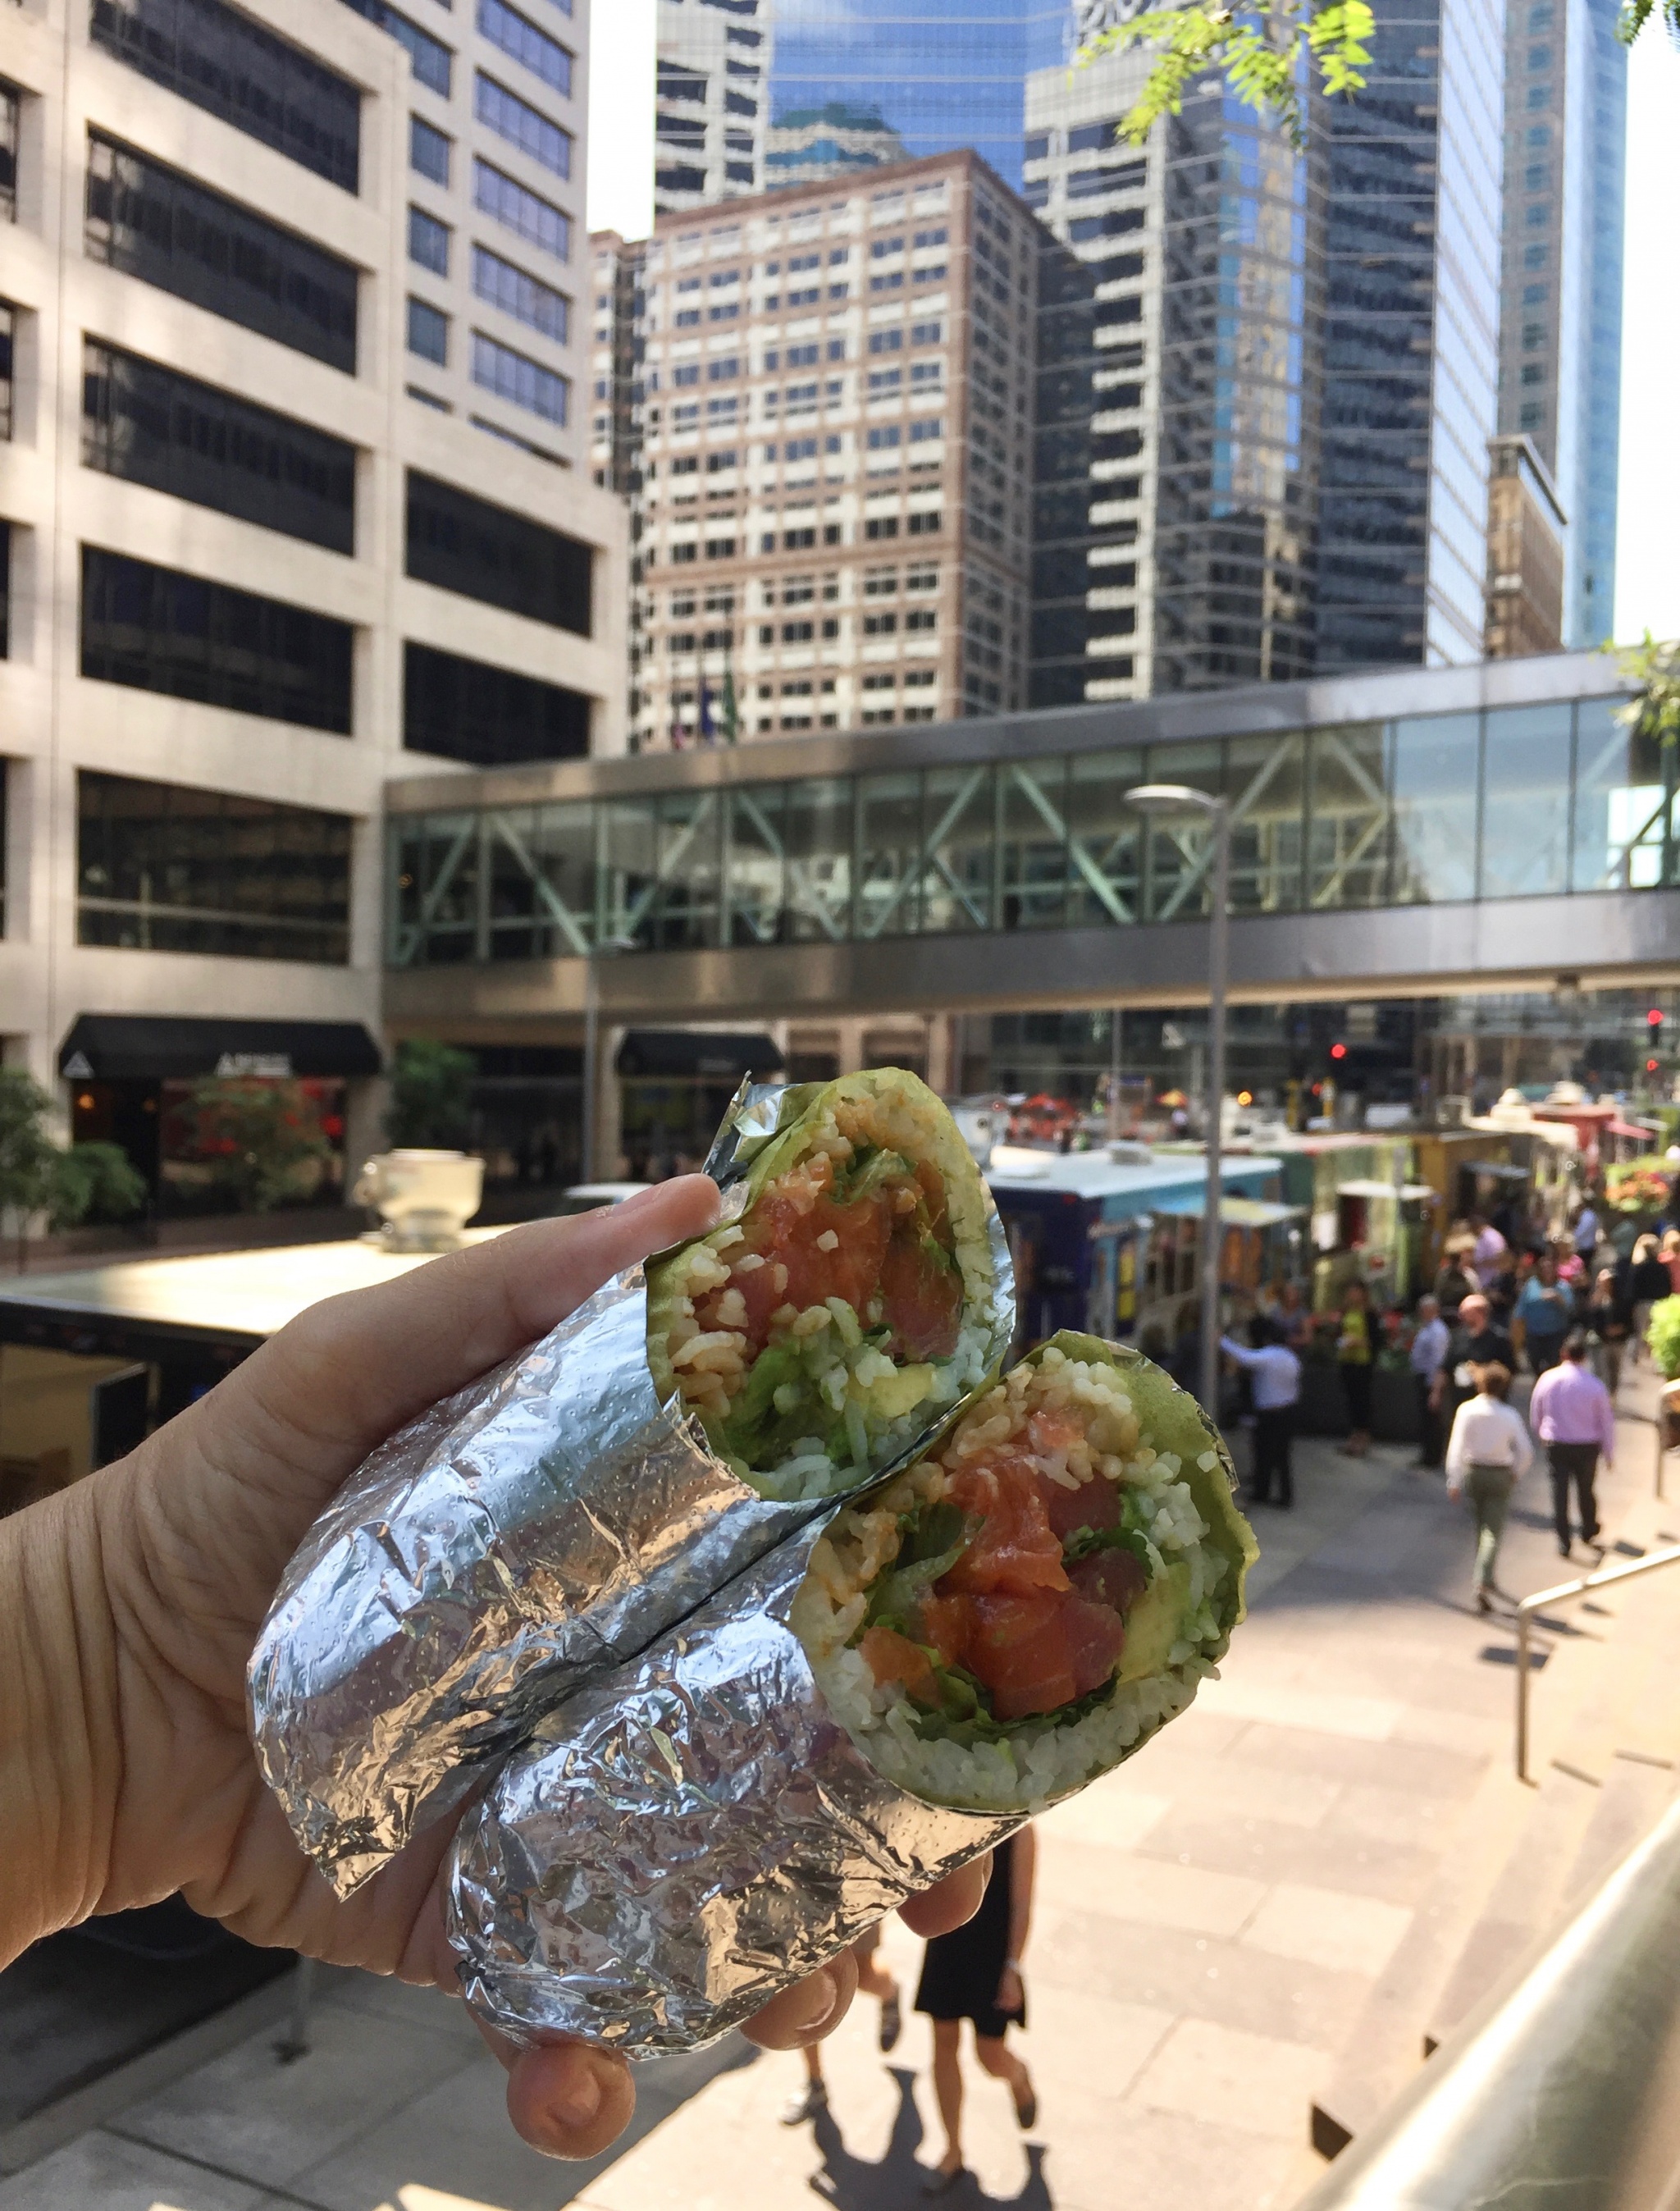 Food truck scene in Minneapolis with sushi burritos in the foreground